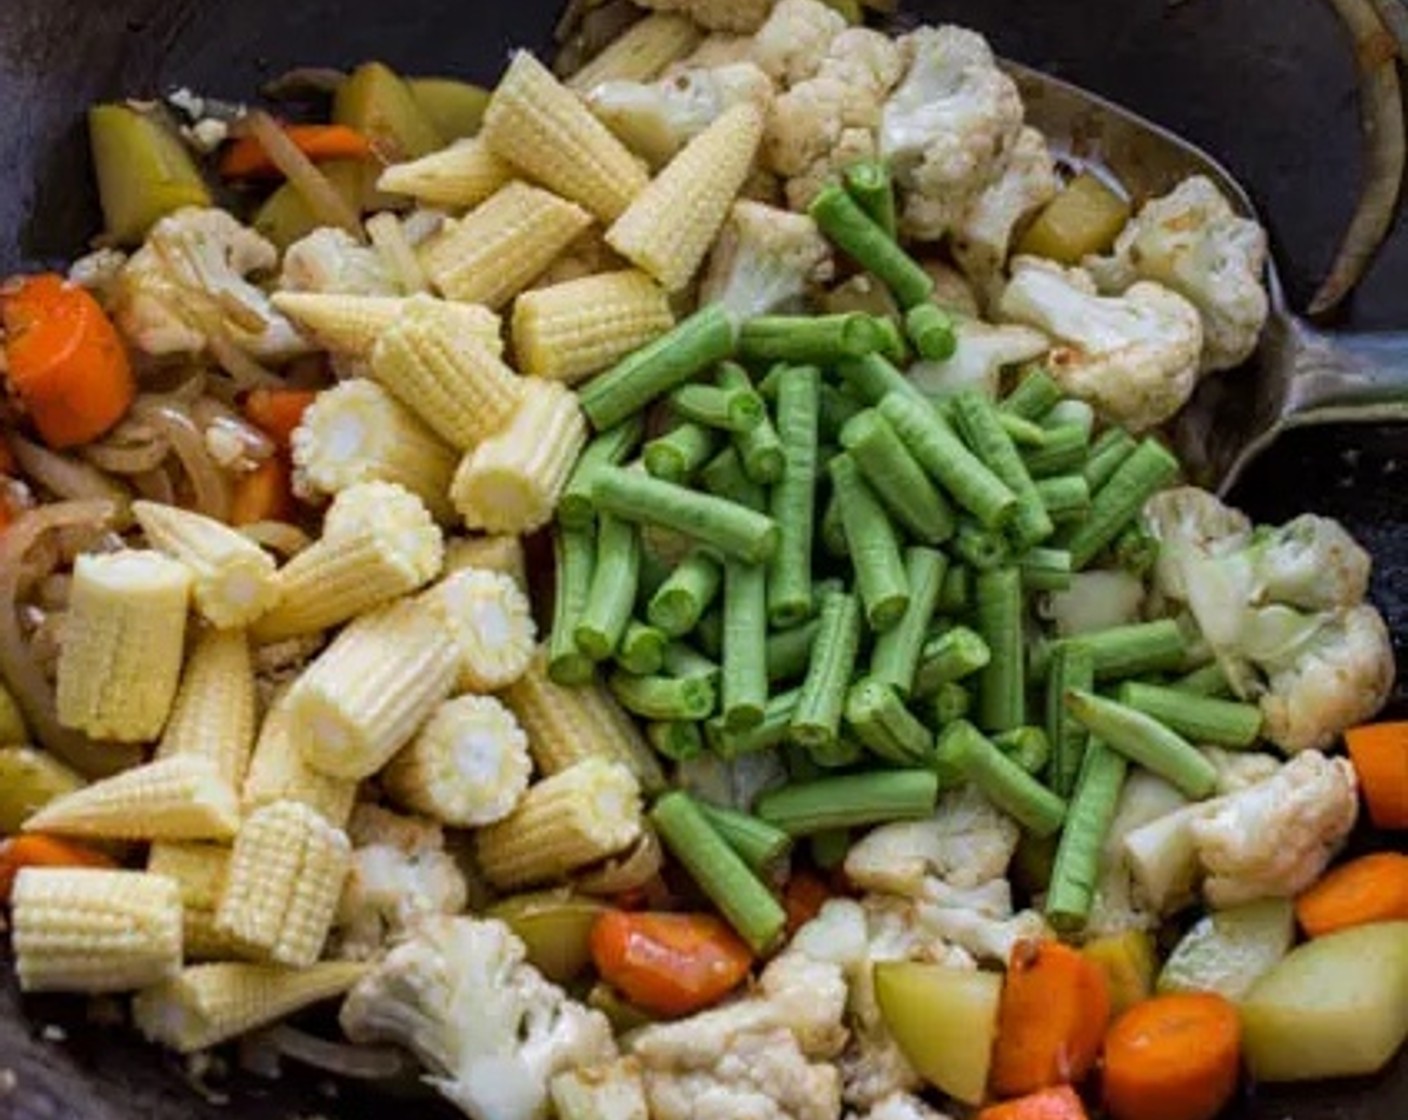 step 4 Toss in Green Beans (1 cup) and Baby Corn (1 1/2 cups) to the wok. Pour 2 Tbsp of water into the wok to help steam the vegetables.